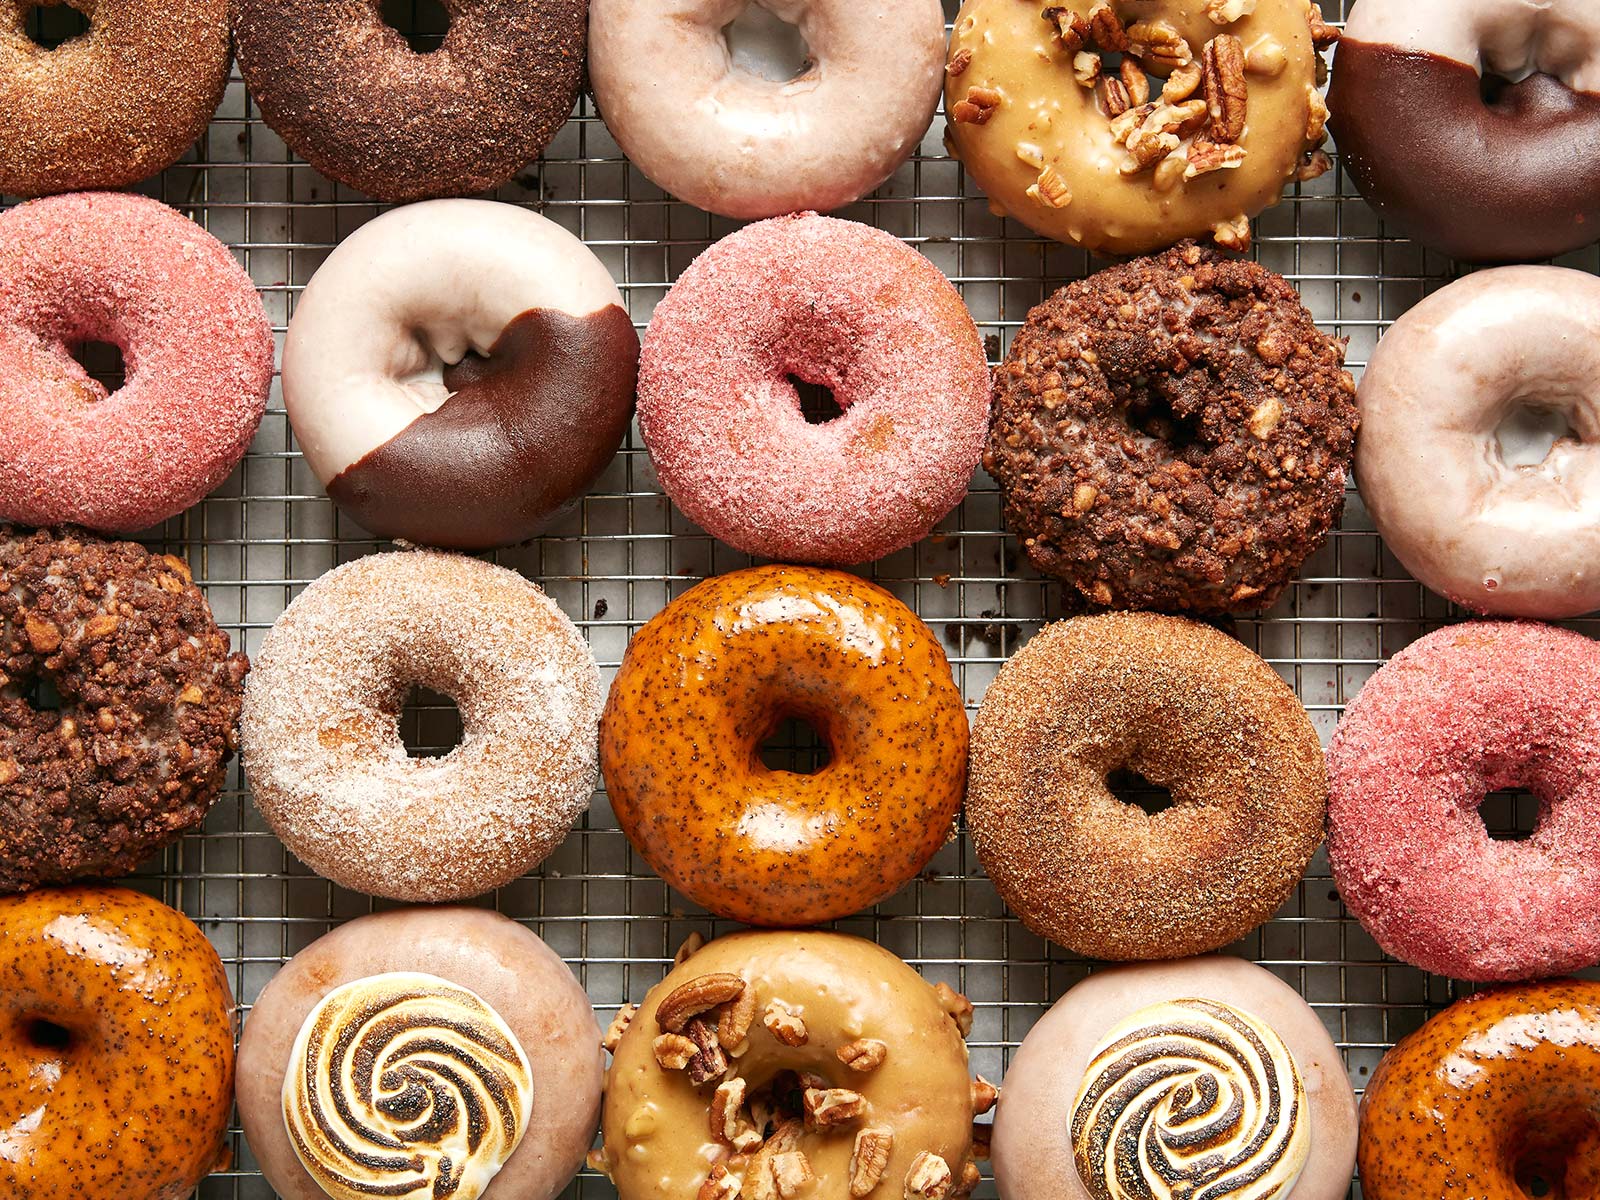 🍴 If You Eat 8/25 of These Foods With a Fork, You’re Forking Ridiculous Doughnuts